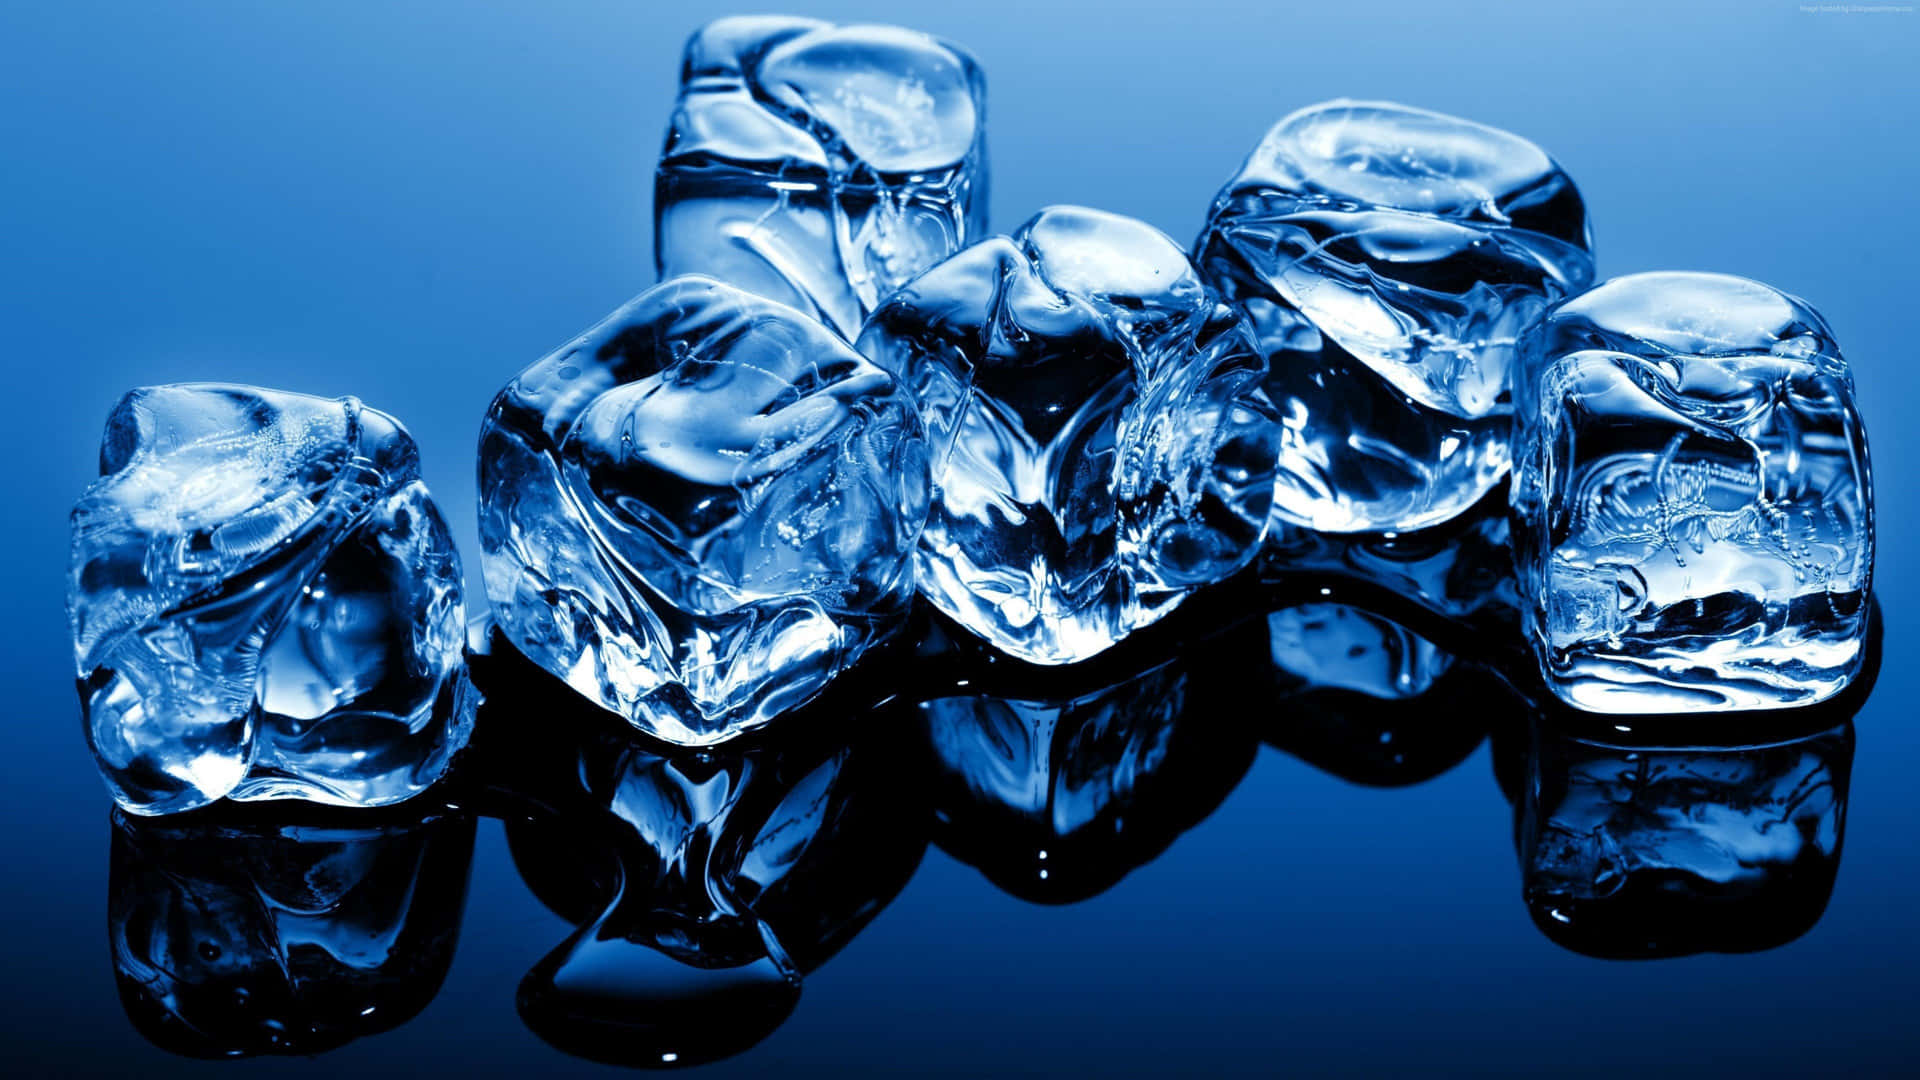 Cool As Ice - Cooling Refreshing Feel.